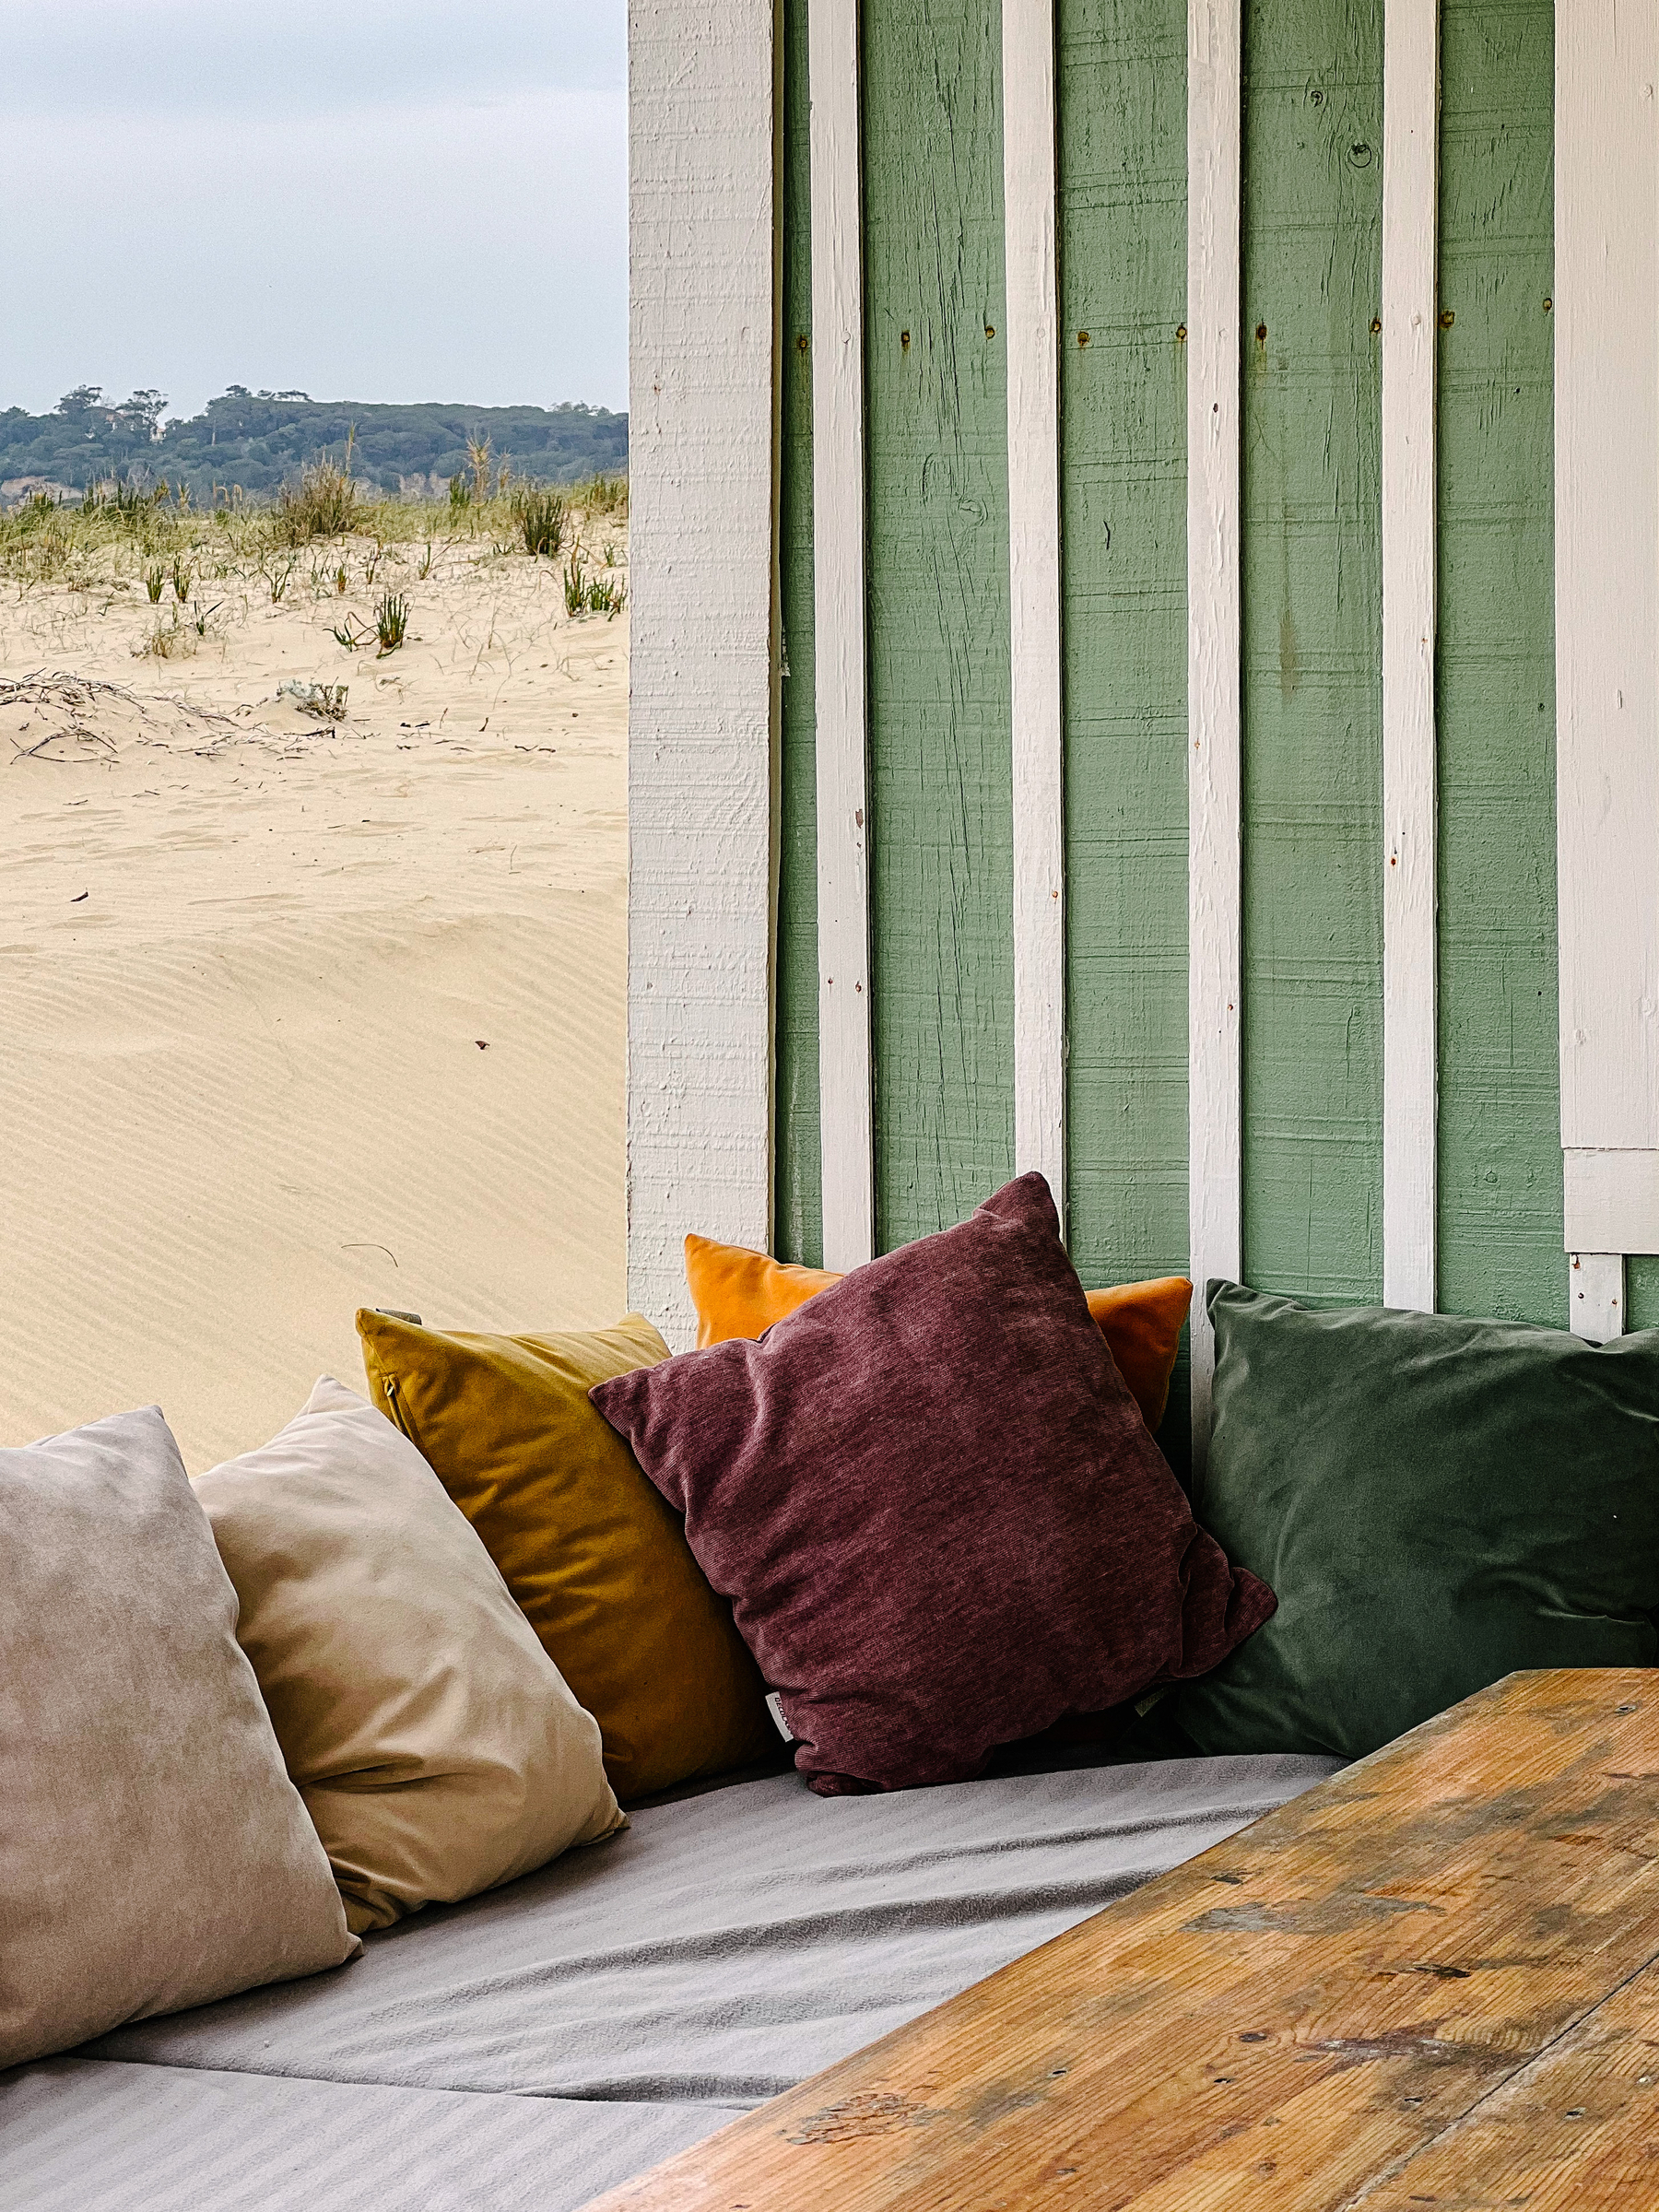 Pillows next to a green wall, with sand in the background. 